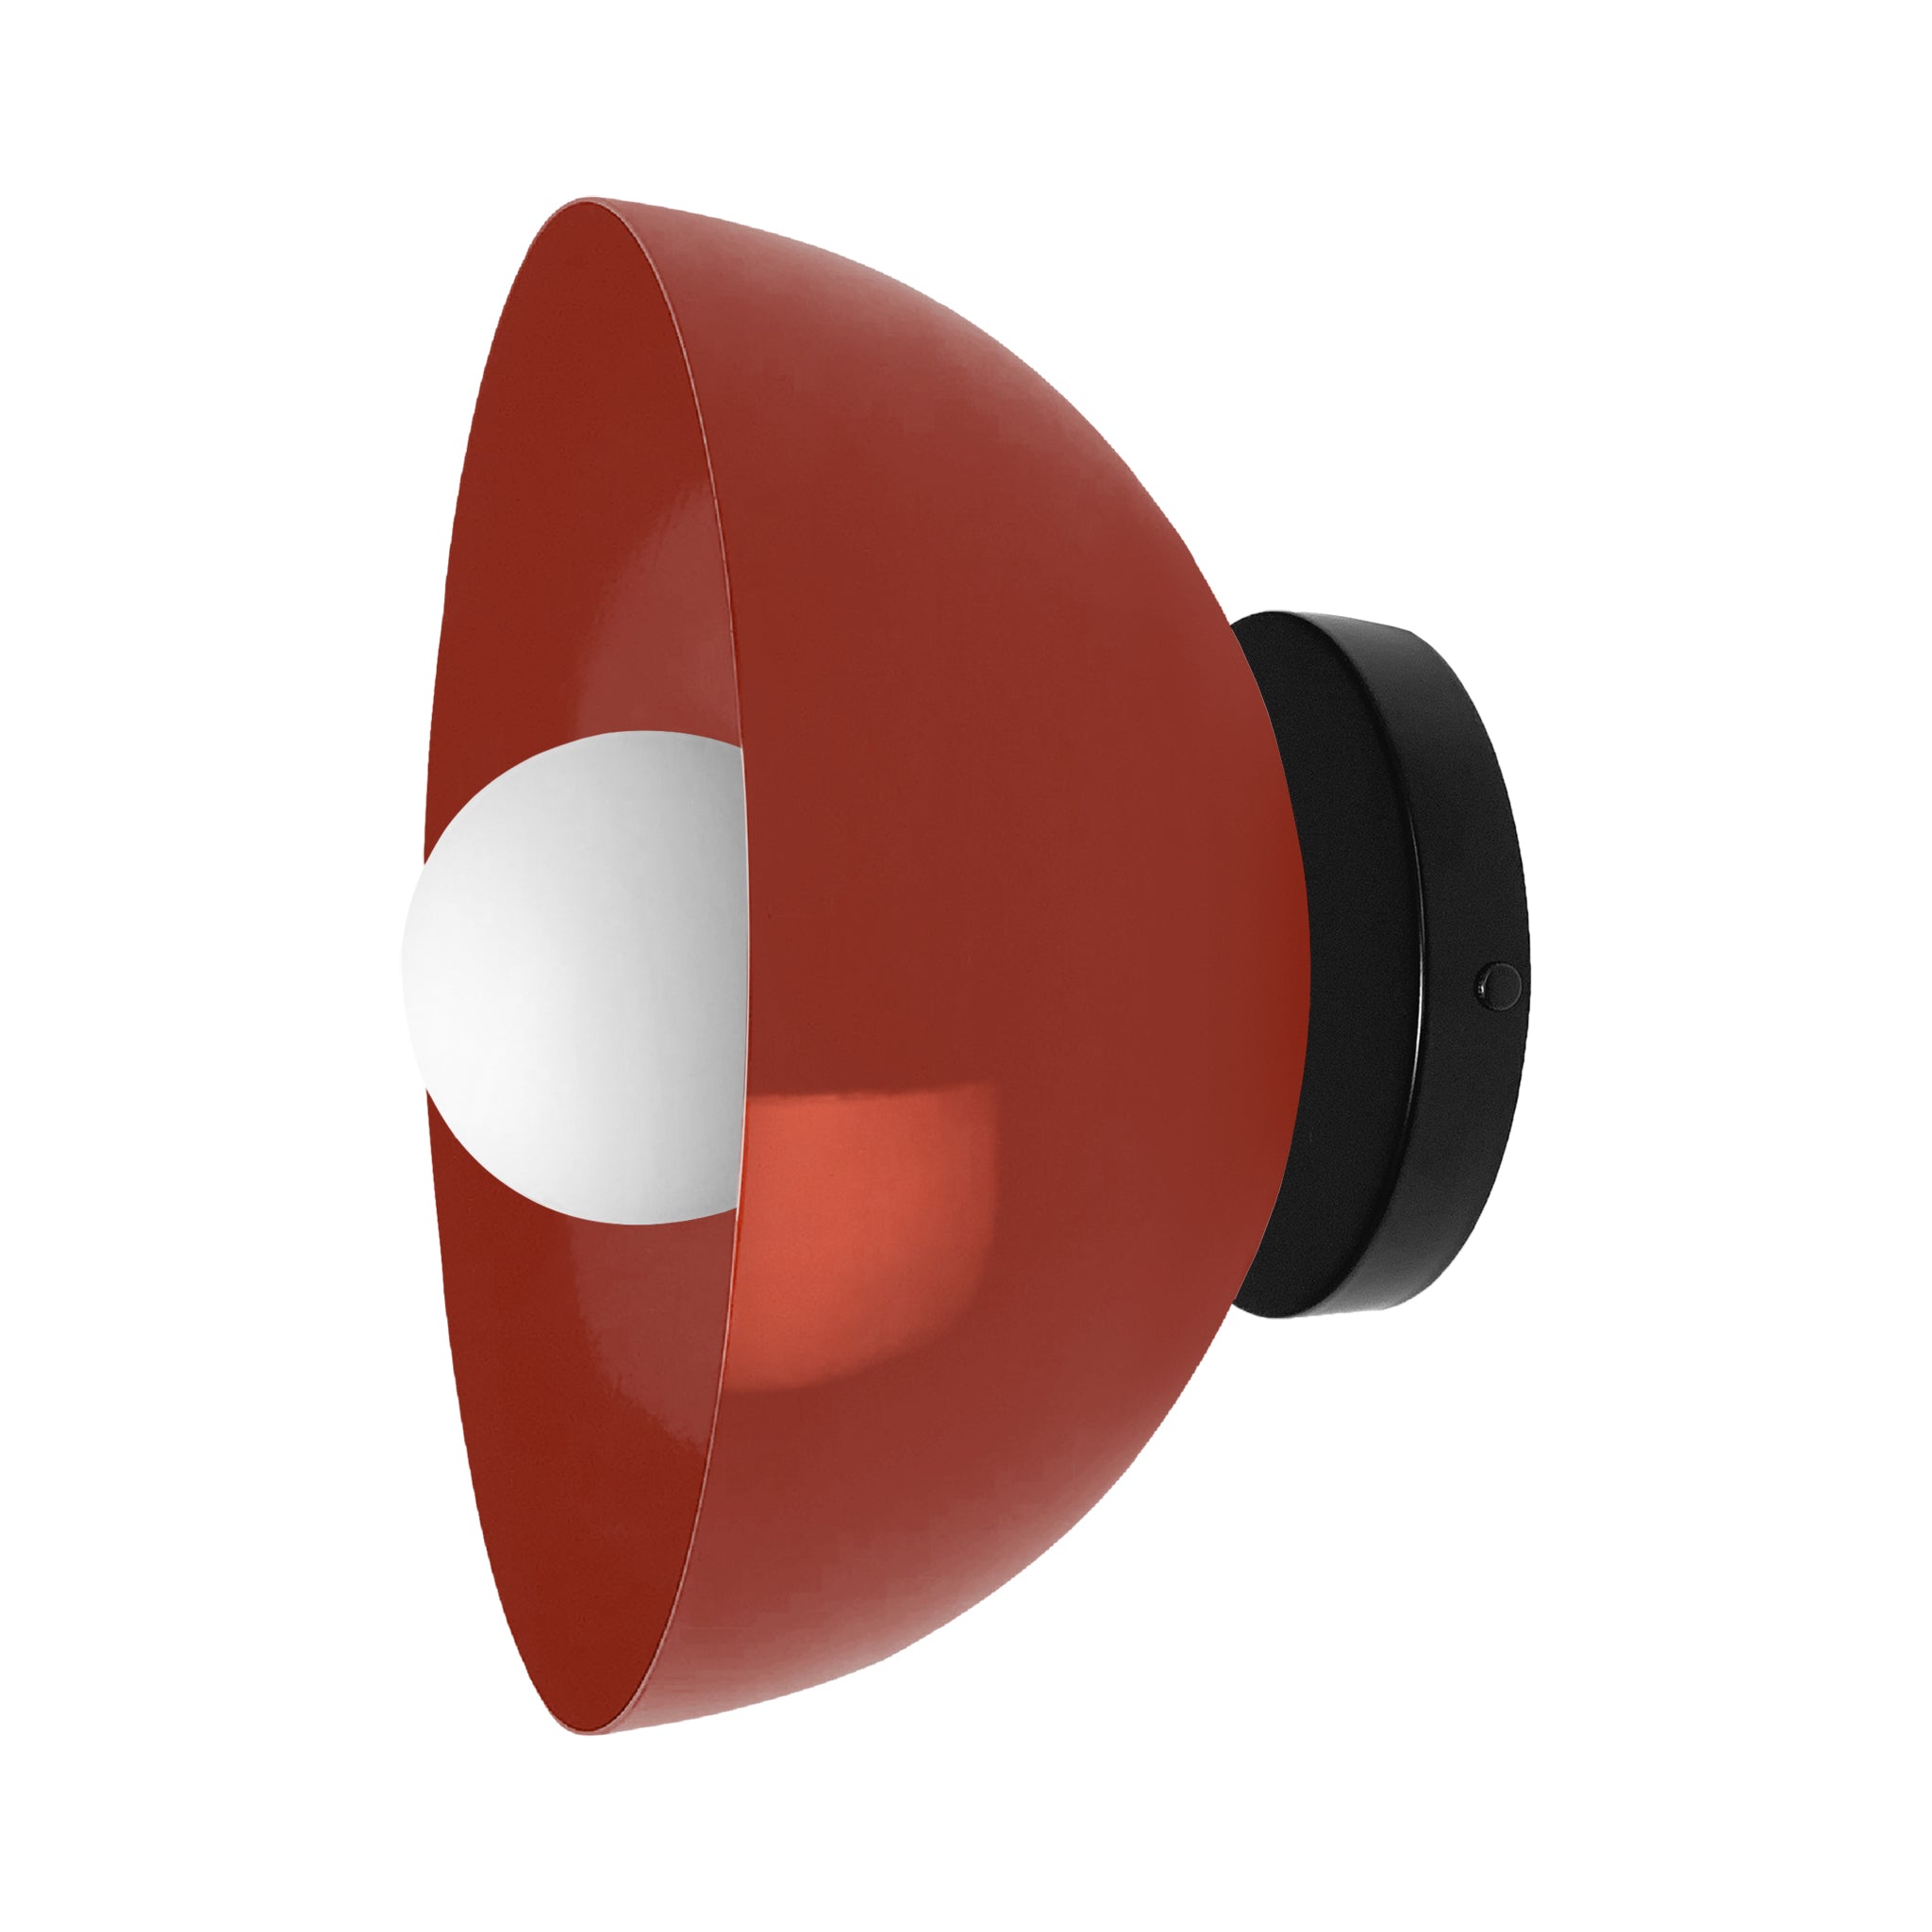 Black and riding hood red color Hemi sconce 10" Dutton Brown lighting